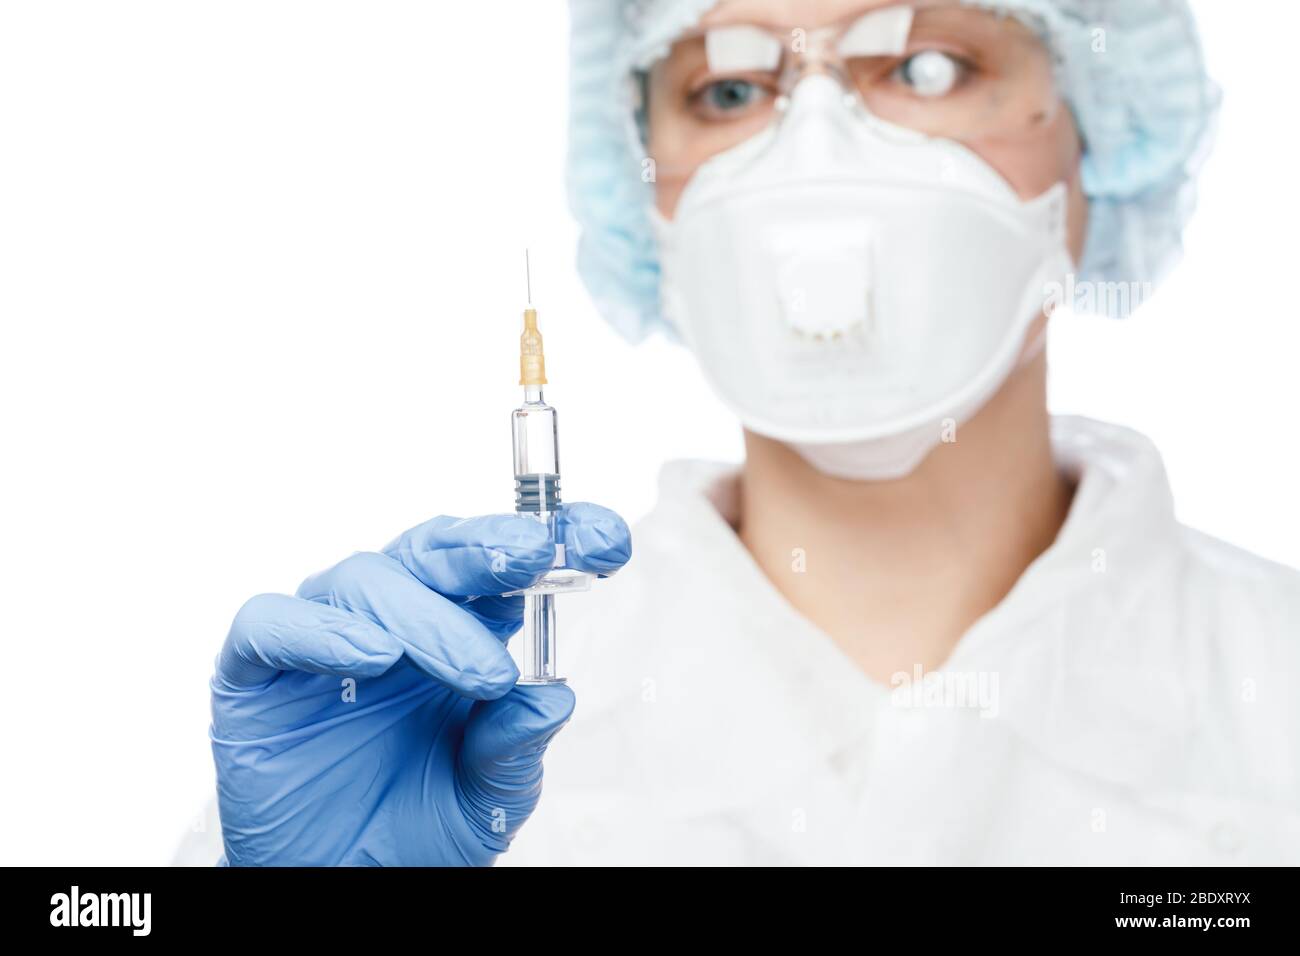 Close-up shot of doctor wearing protective suit, goggles and surgical mask holding syringe ready for injection Stock Photo